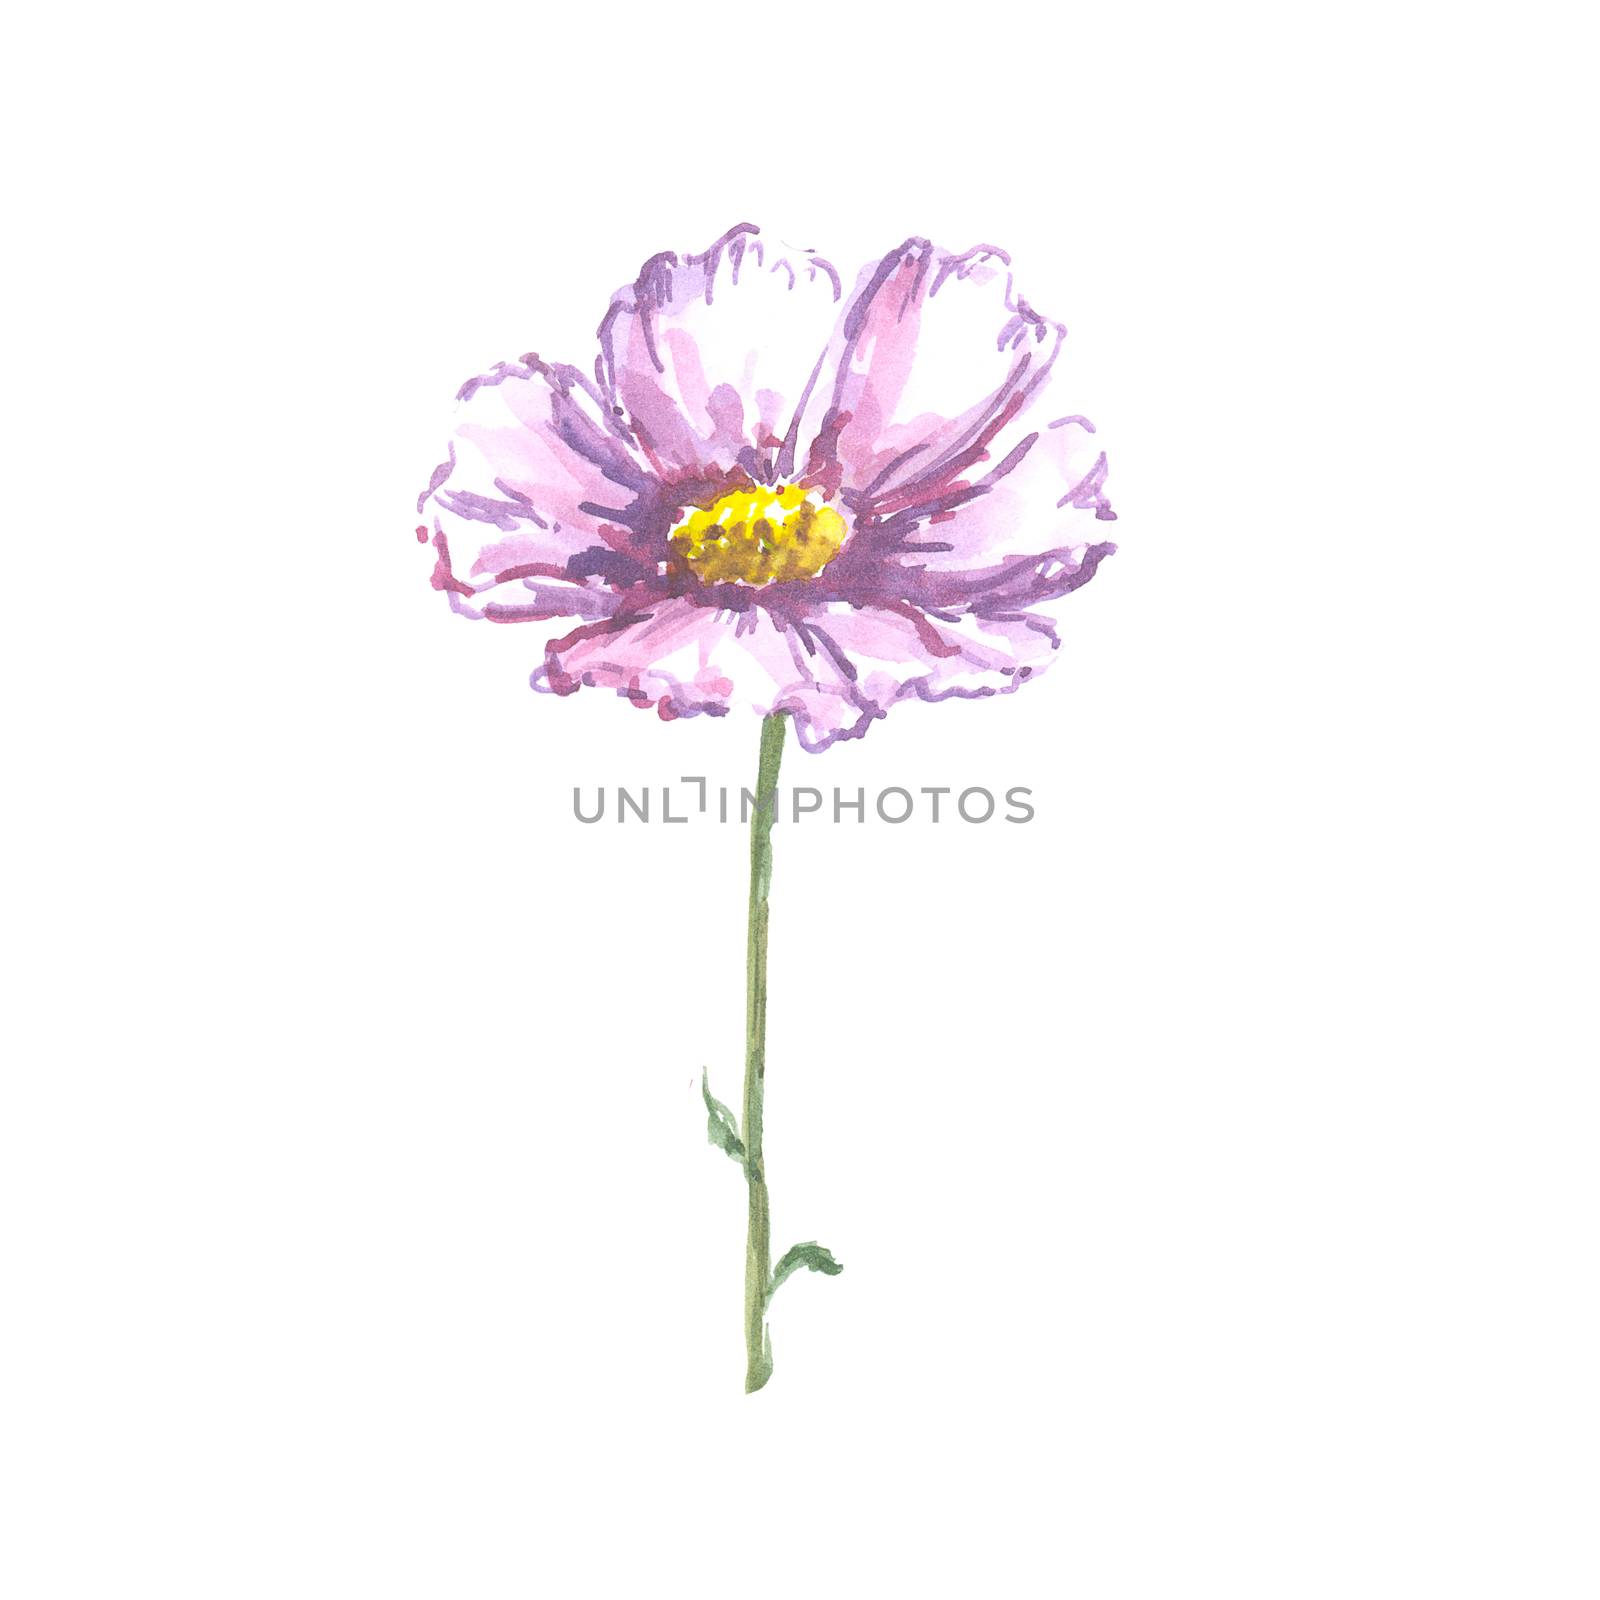 Bright watercolor flower with leaf isolated on easy for cut white background